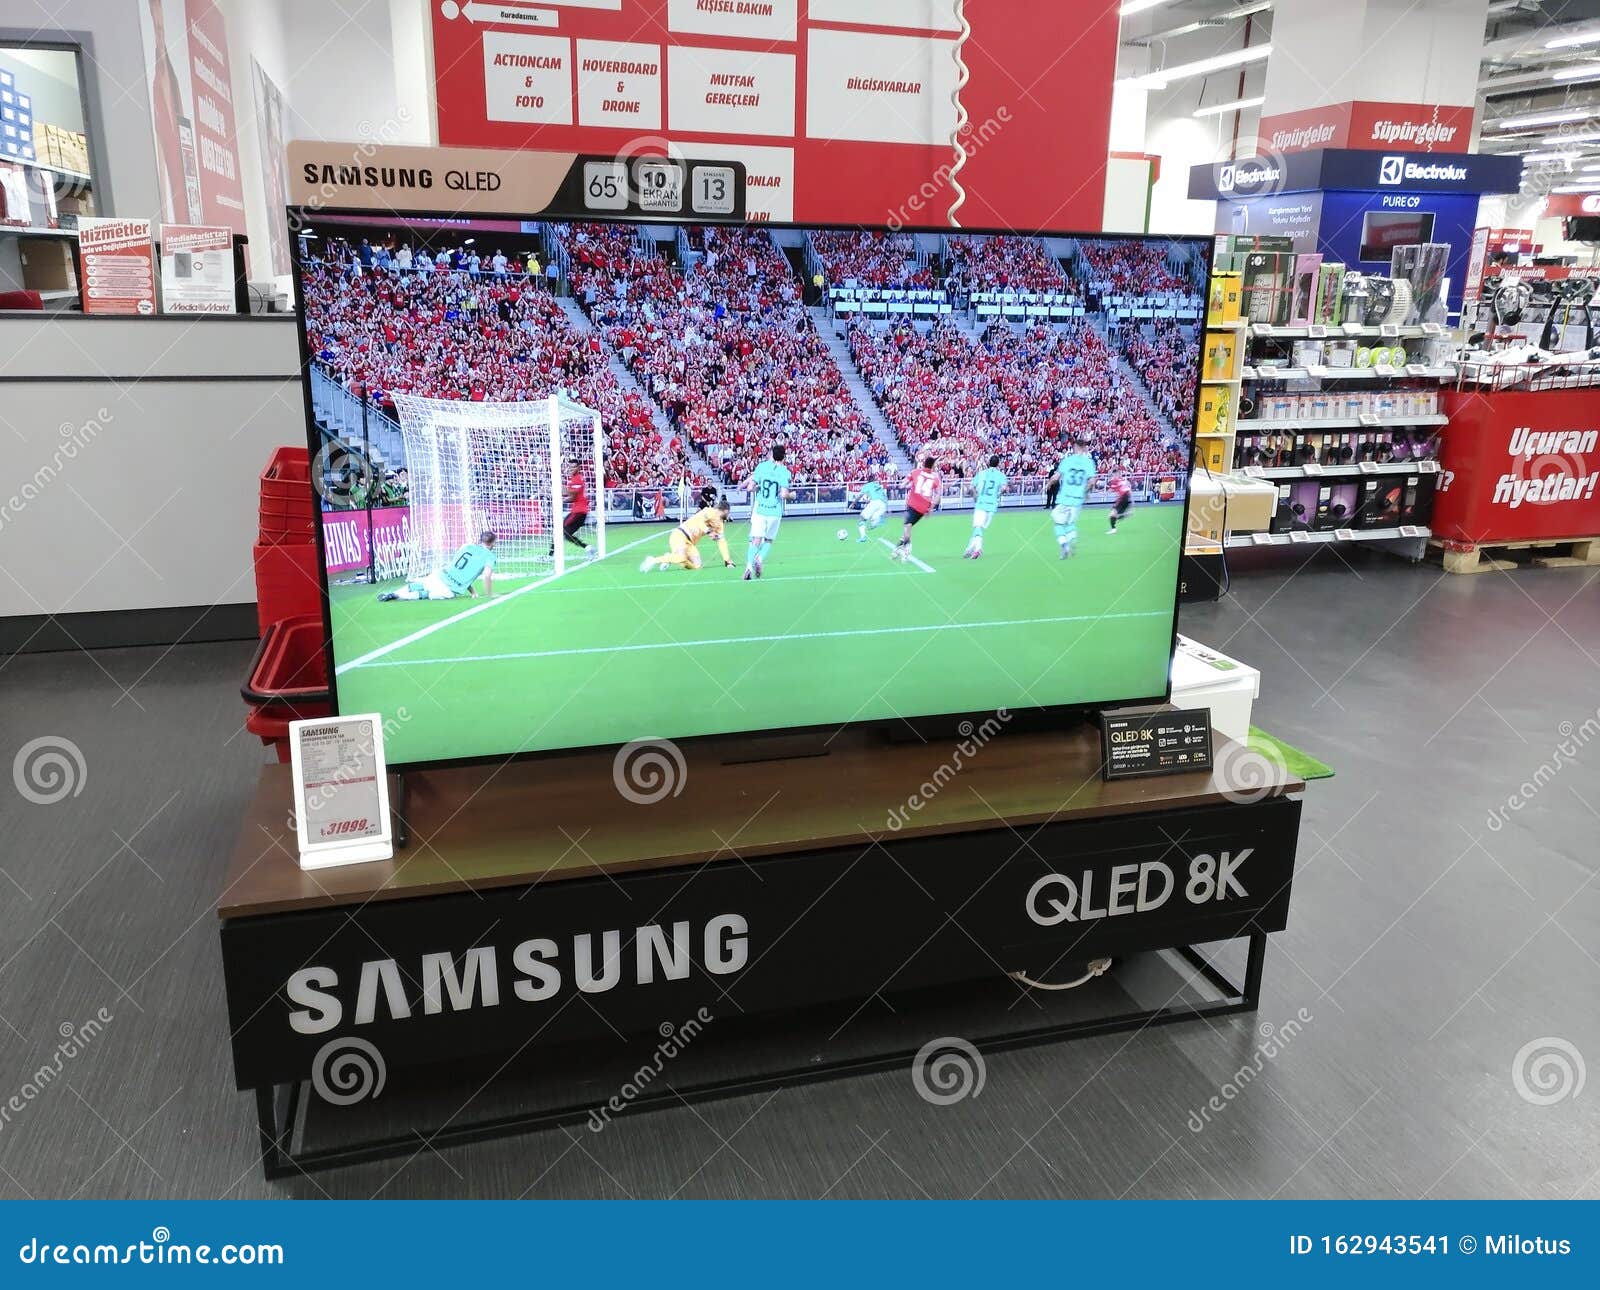 QLED 8K 65inch Smart TV on Display, Inside Markt Electronic at Editorial Photo - Image of entertainment, resolution: 162943541